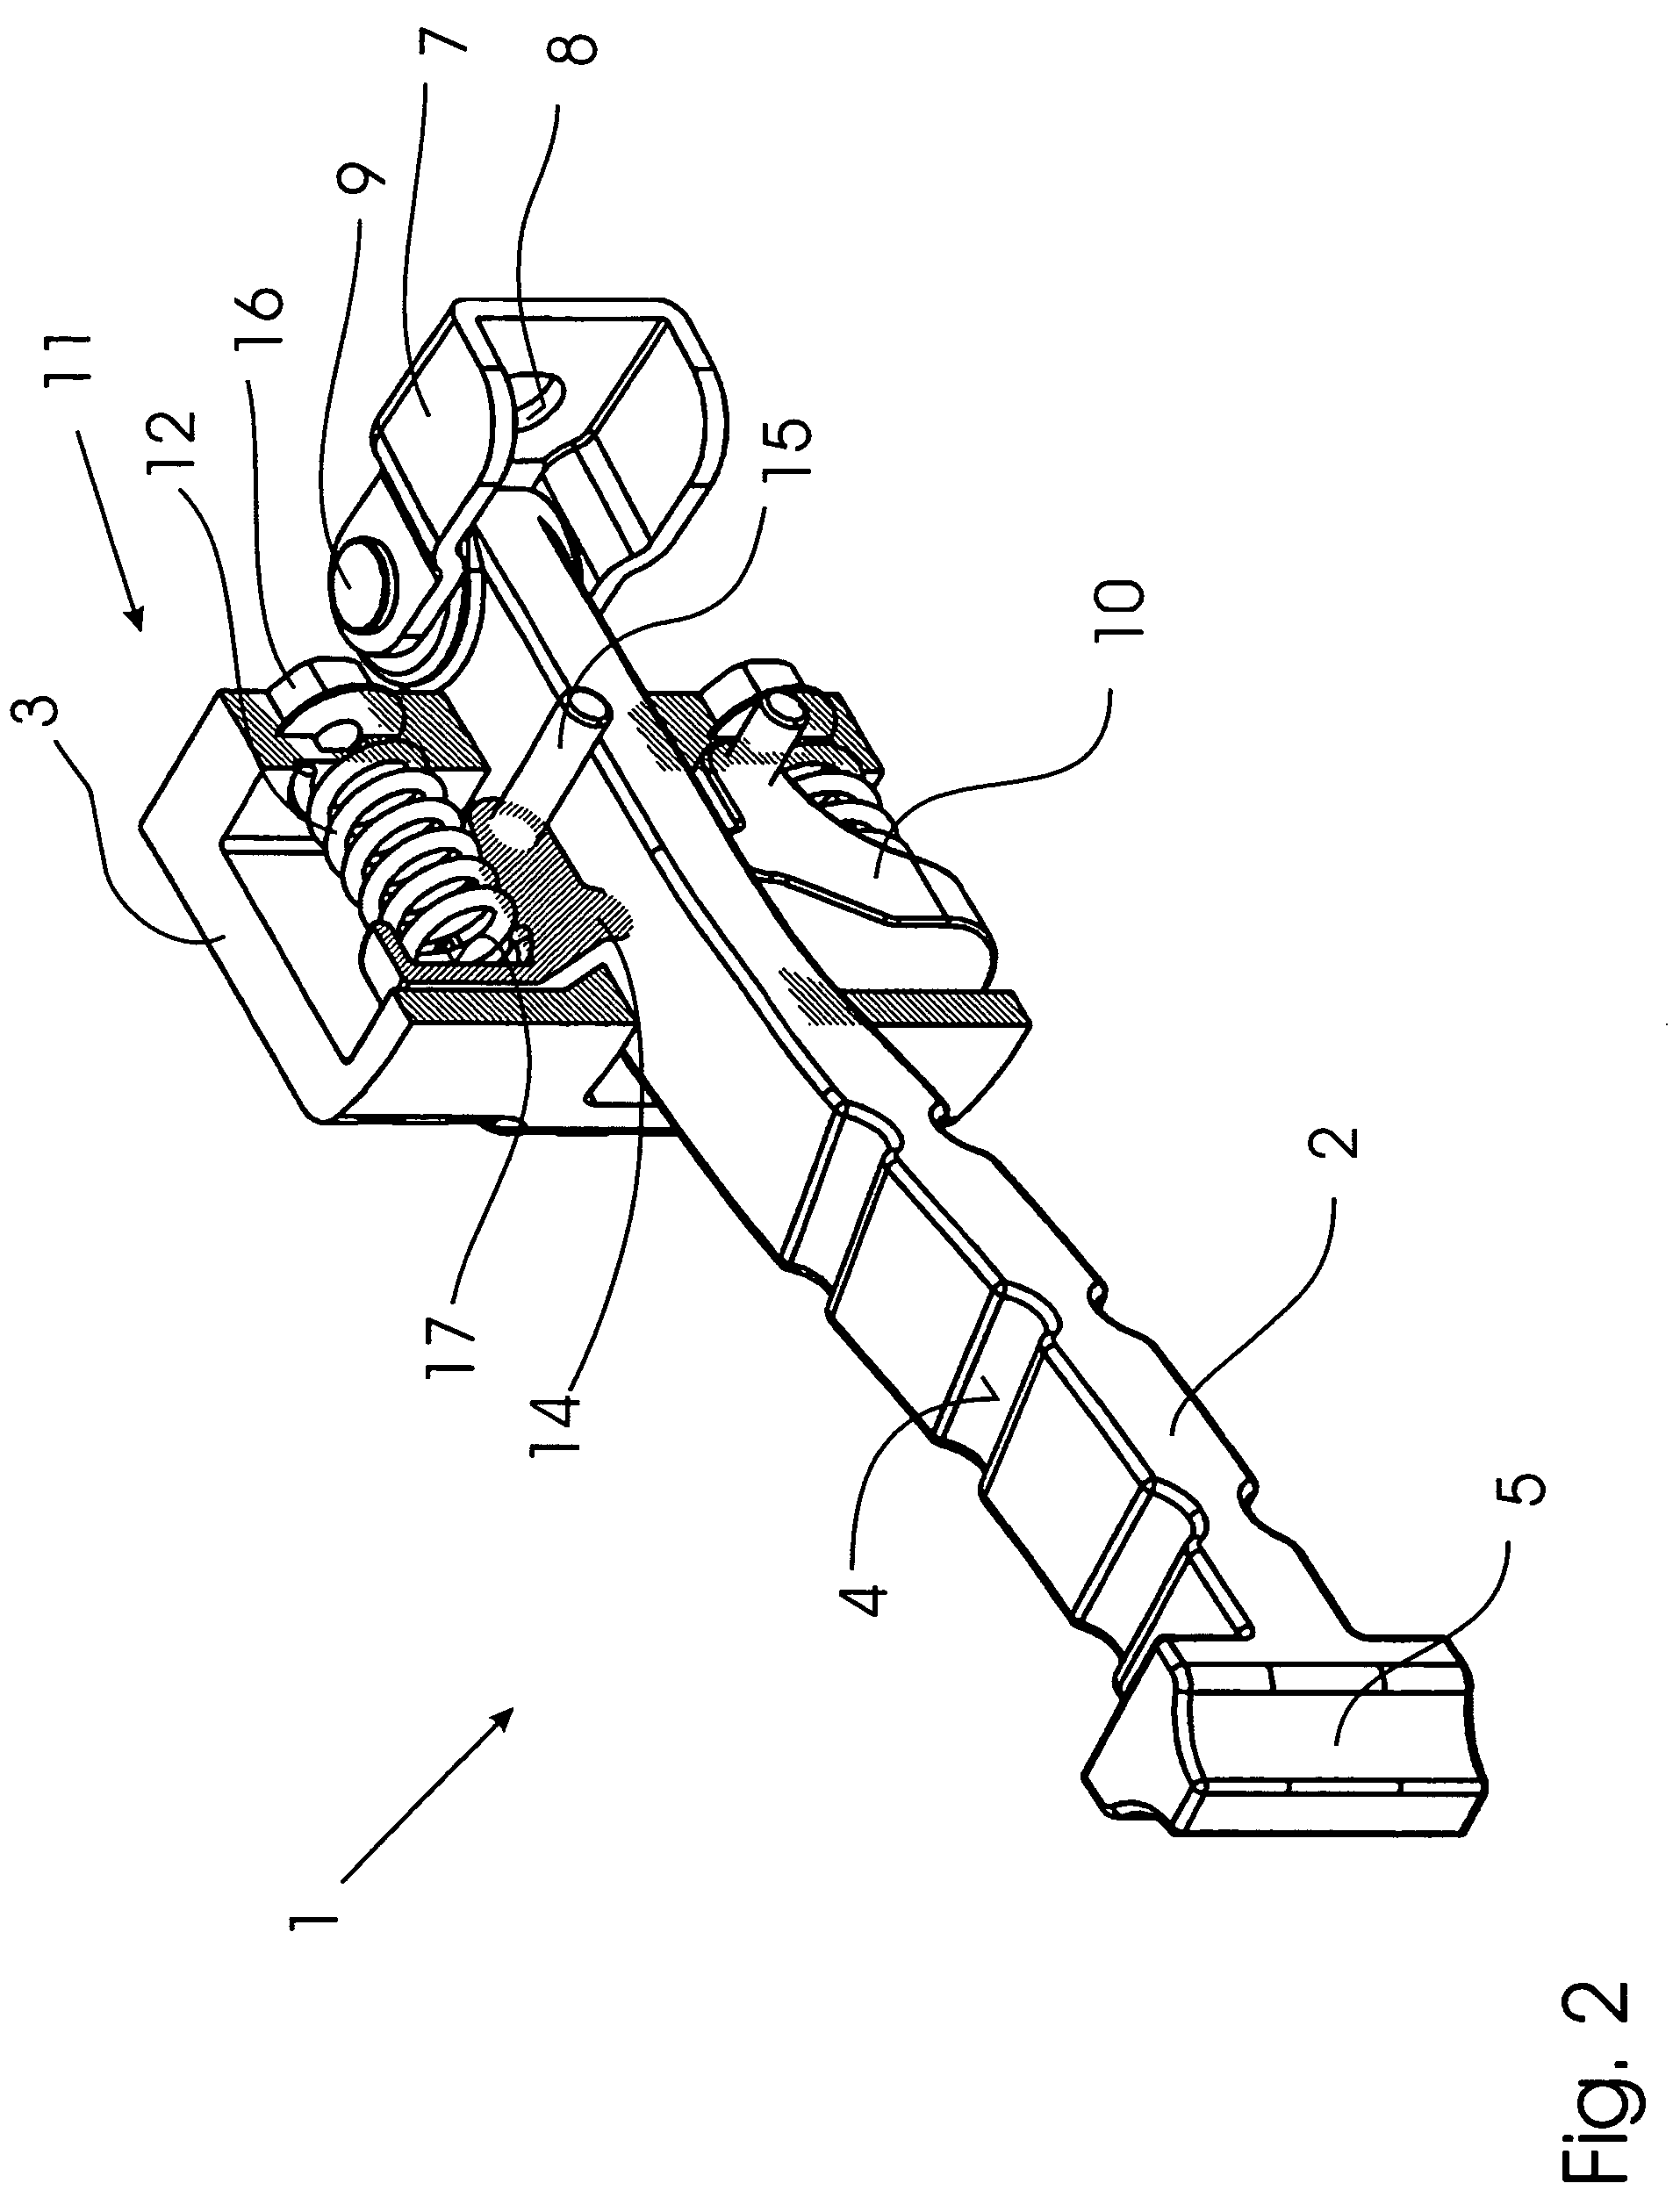 Door-stopping device for motor vehicles